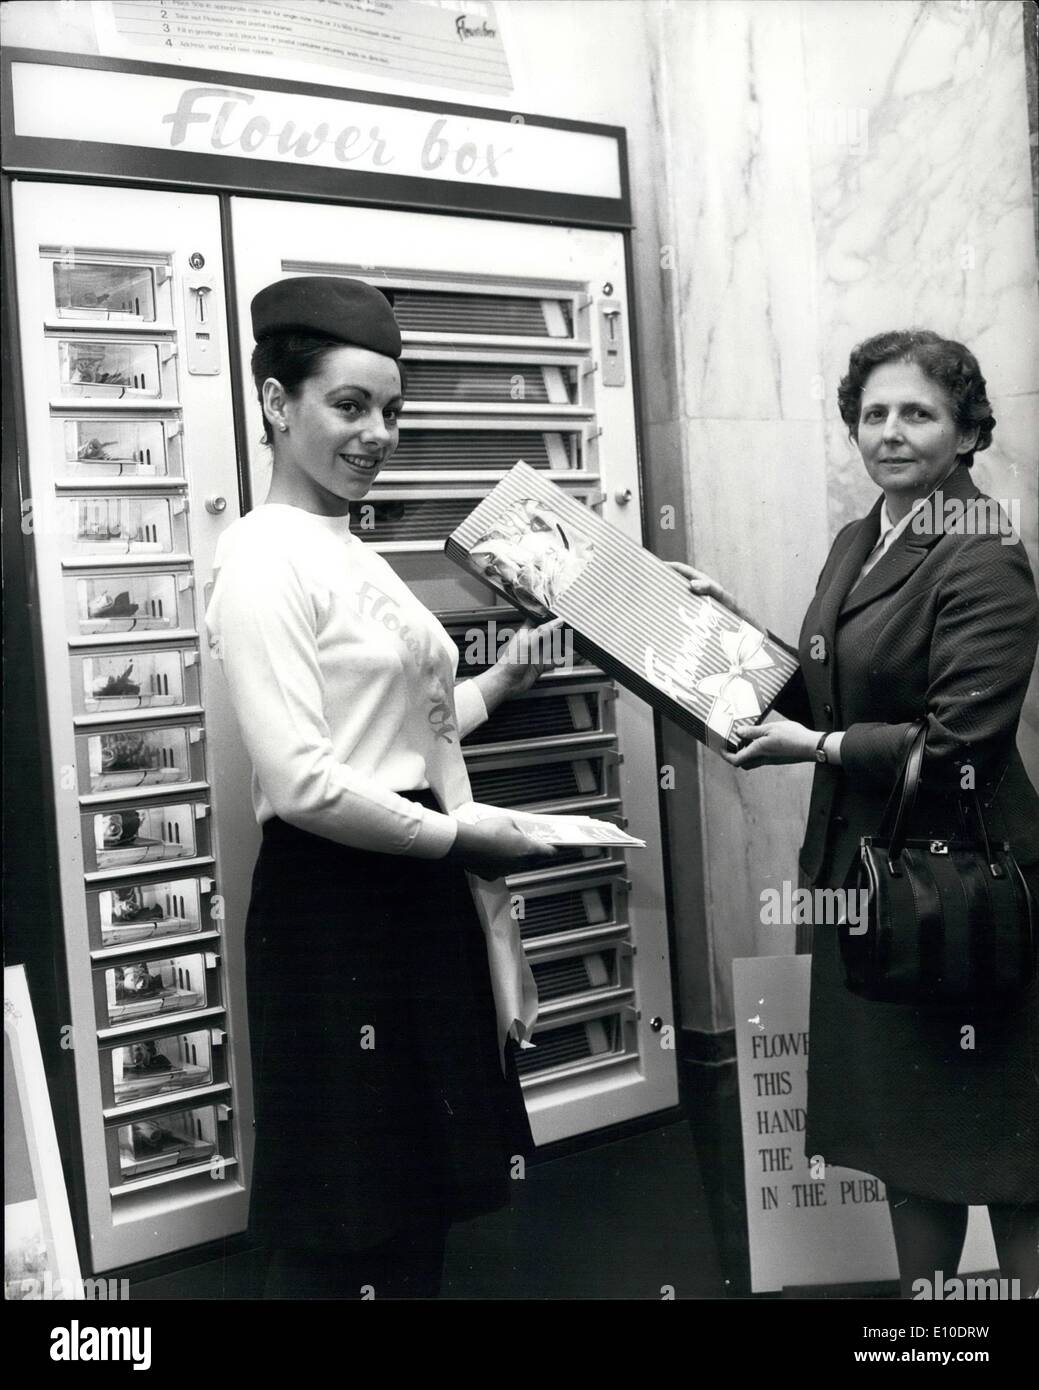 May 05, 1972 - Britain's First gift wrapped flower post . Britain's first flowers by post vending machines , dispensing pre packed , pre stamped boxes of rosed, went into operation today at the London Chief Office , King Edward Street, London, E.C.L as part of a Post Office trial. For two 50p coins , customers striped box. One 50p coin buys a smaller box containing one rose and a greetings card. Photo shows Miss Dorothx , director of London Postal region , purchases a box of nine roses from the vending machine (seen behind) after inserting two 50p coins today Stock Photo